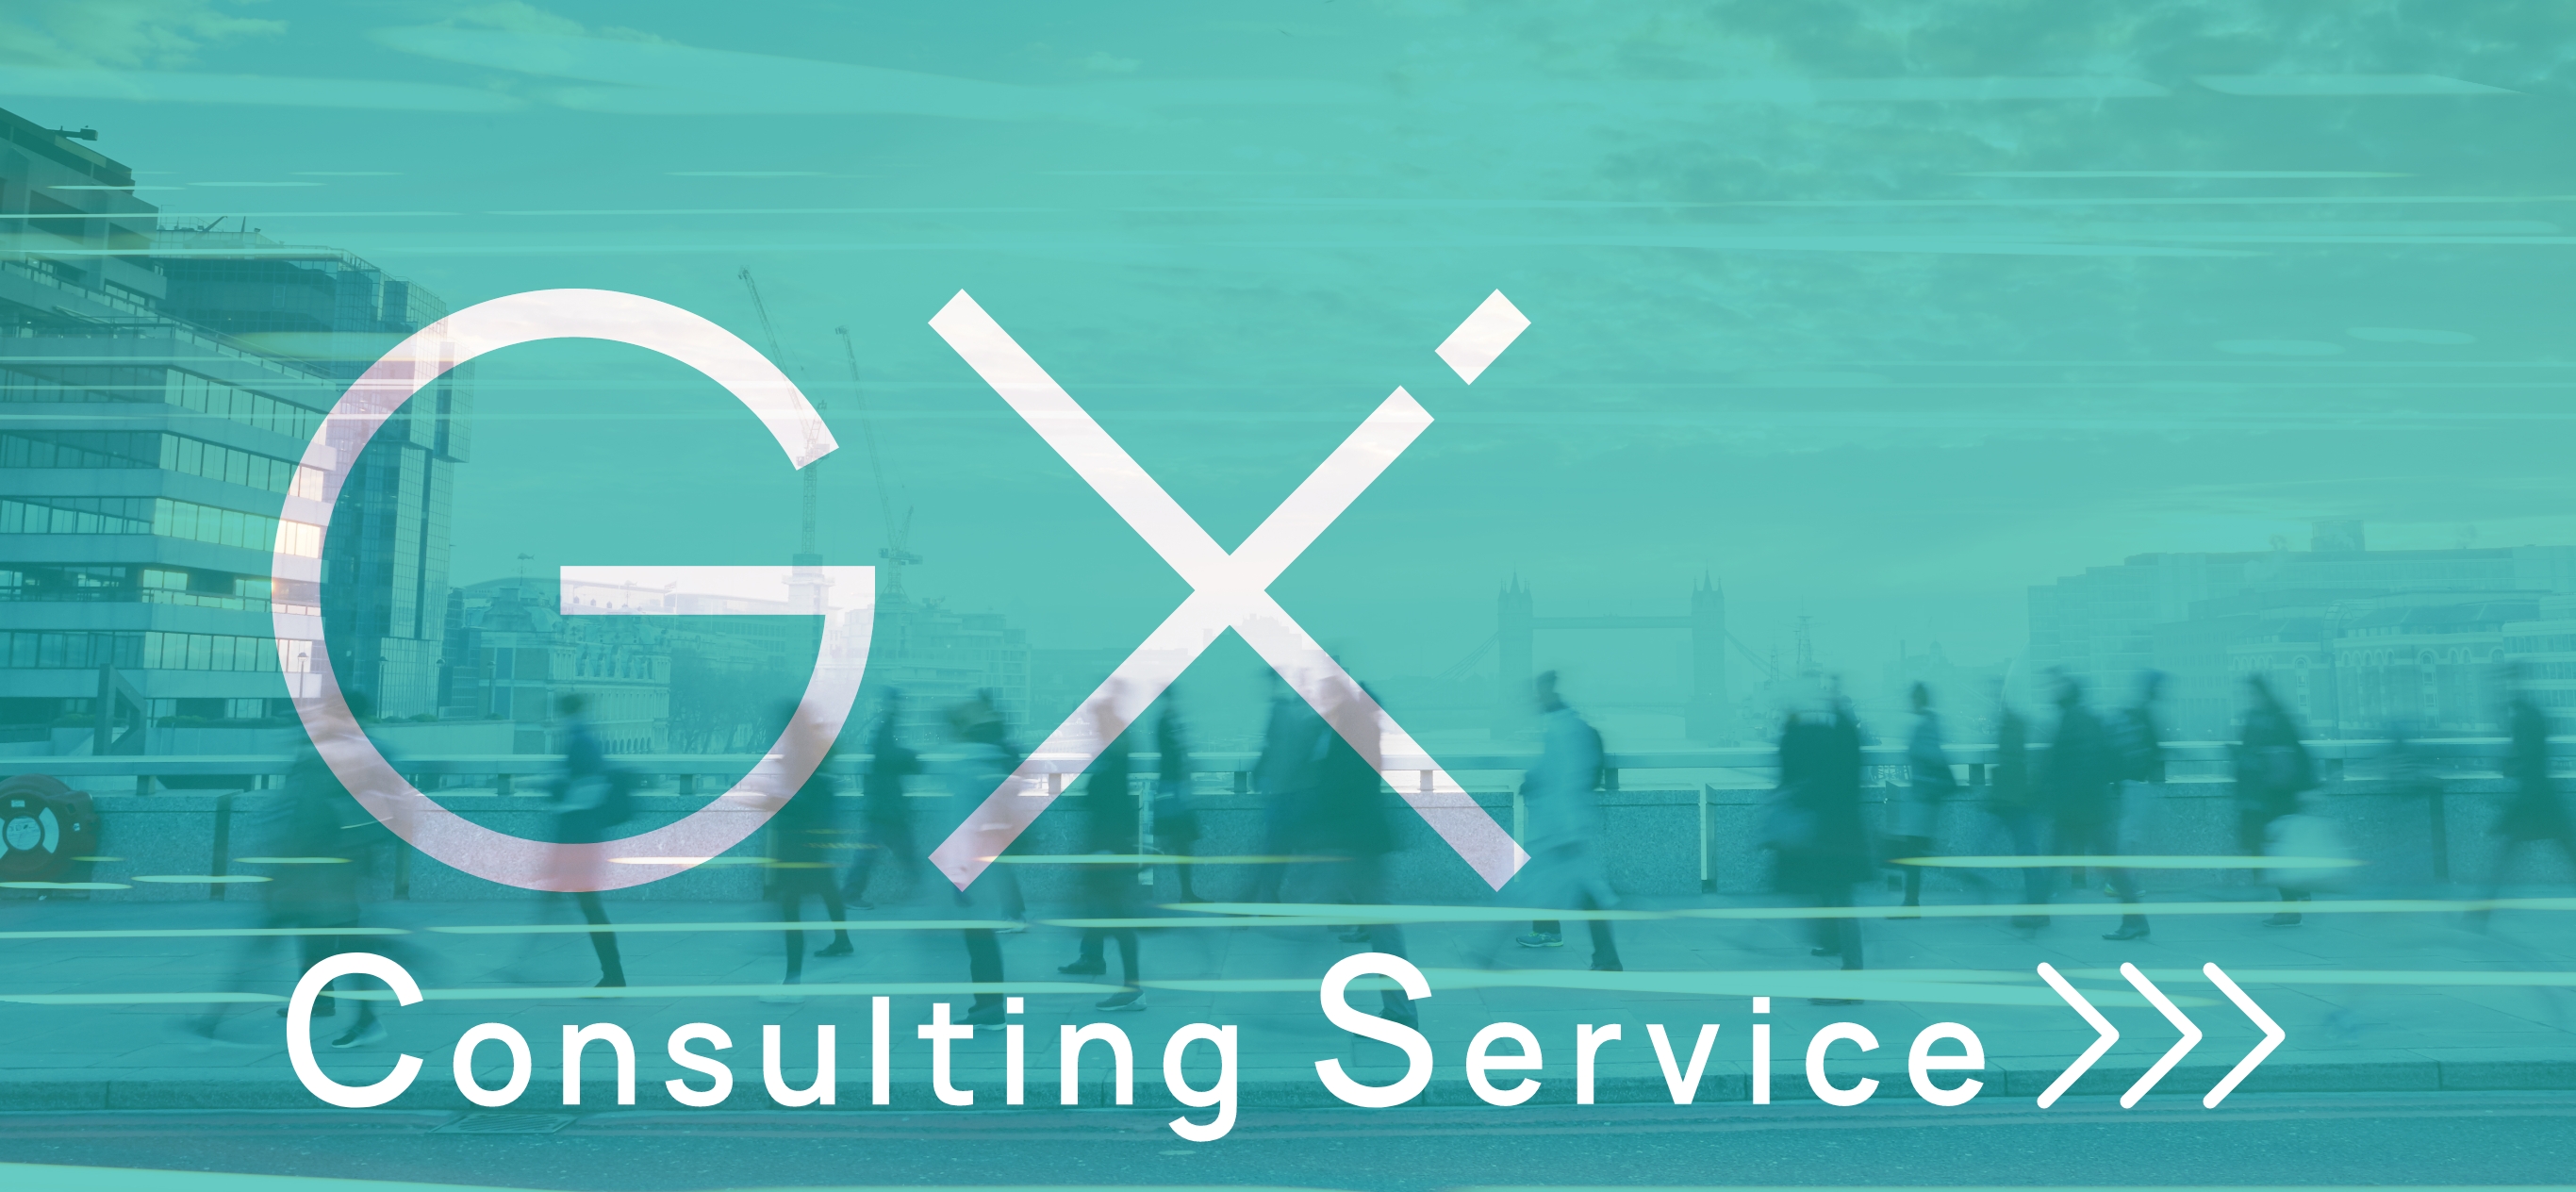 GX Consulting Service